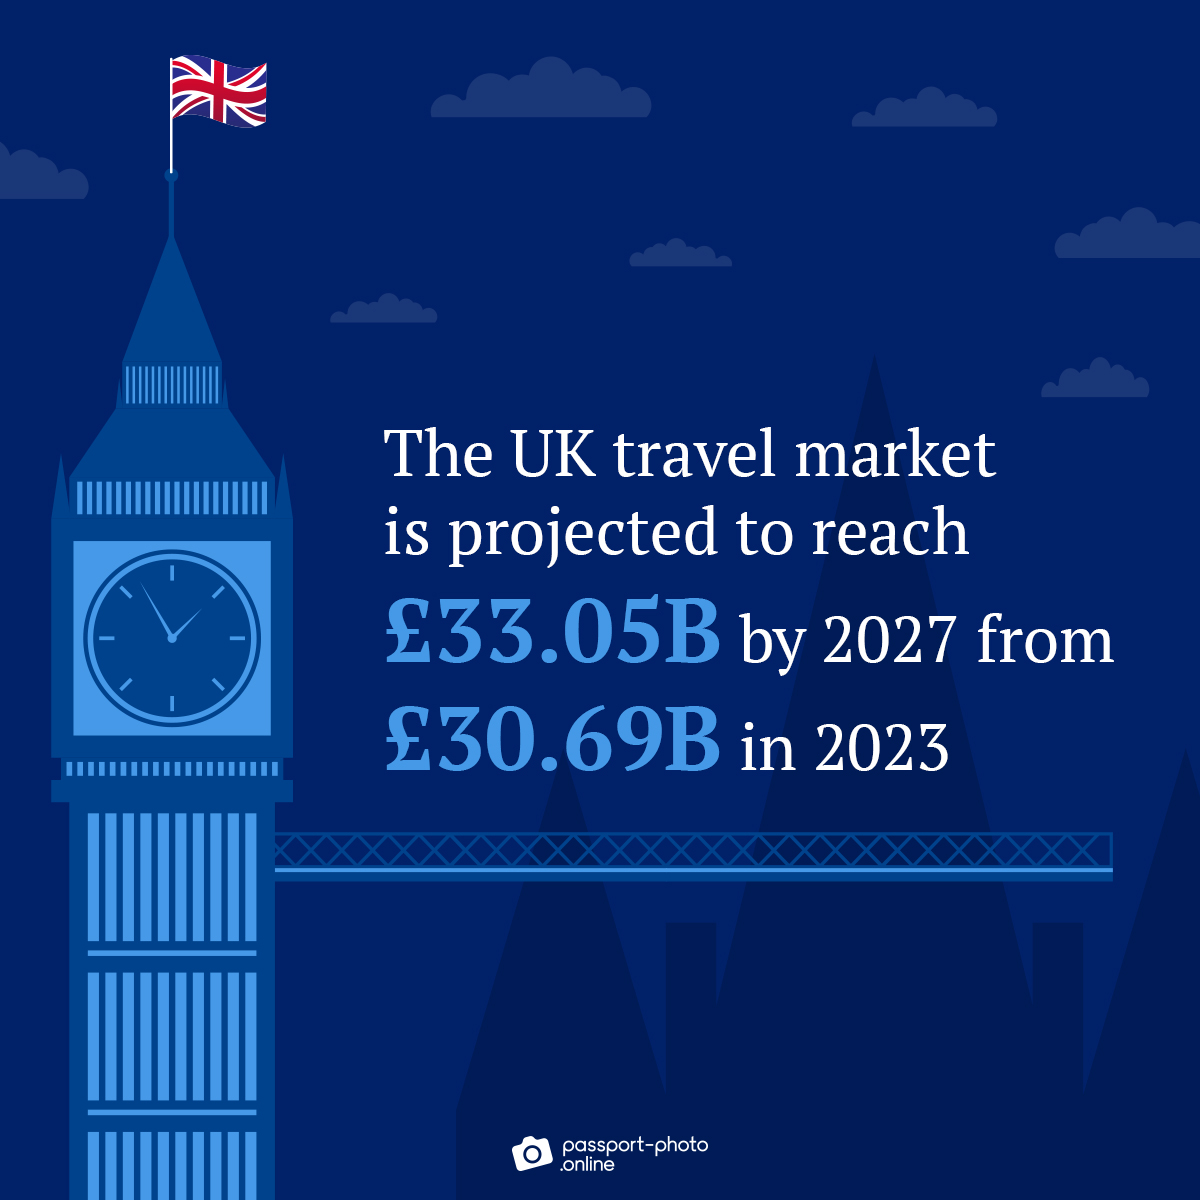 The UK travel market is projected to reach £33.05B by 2027 from £30.69B in 2023